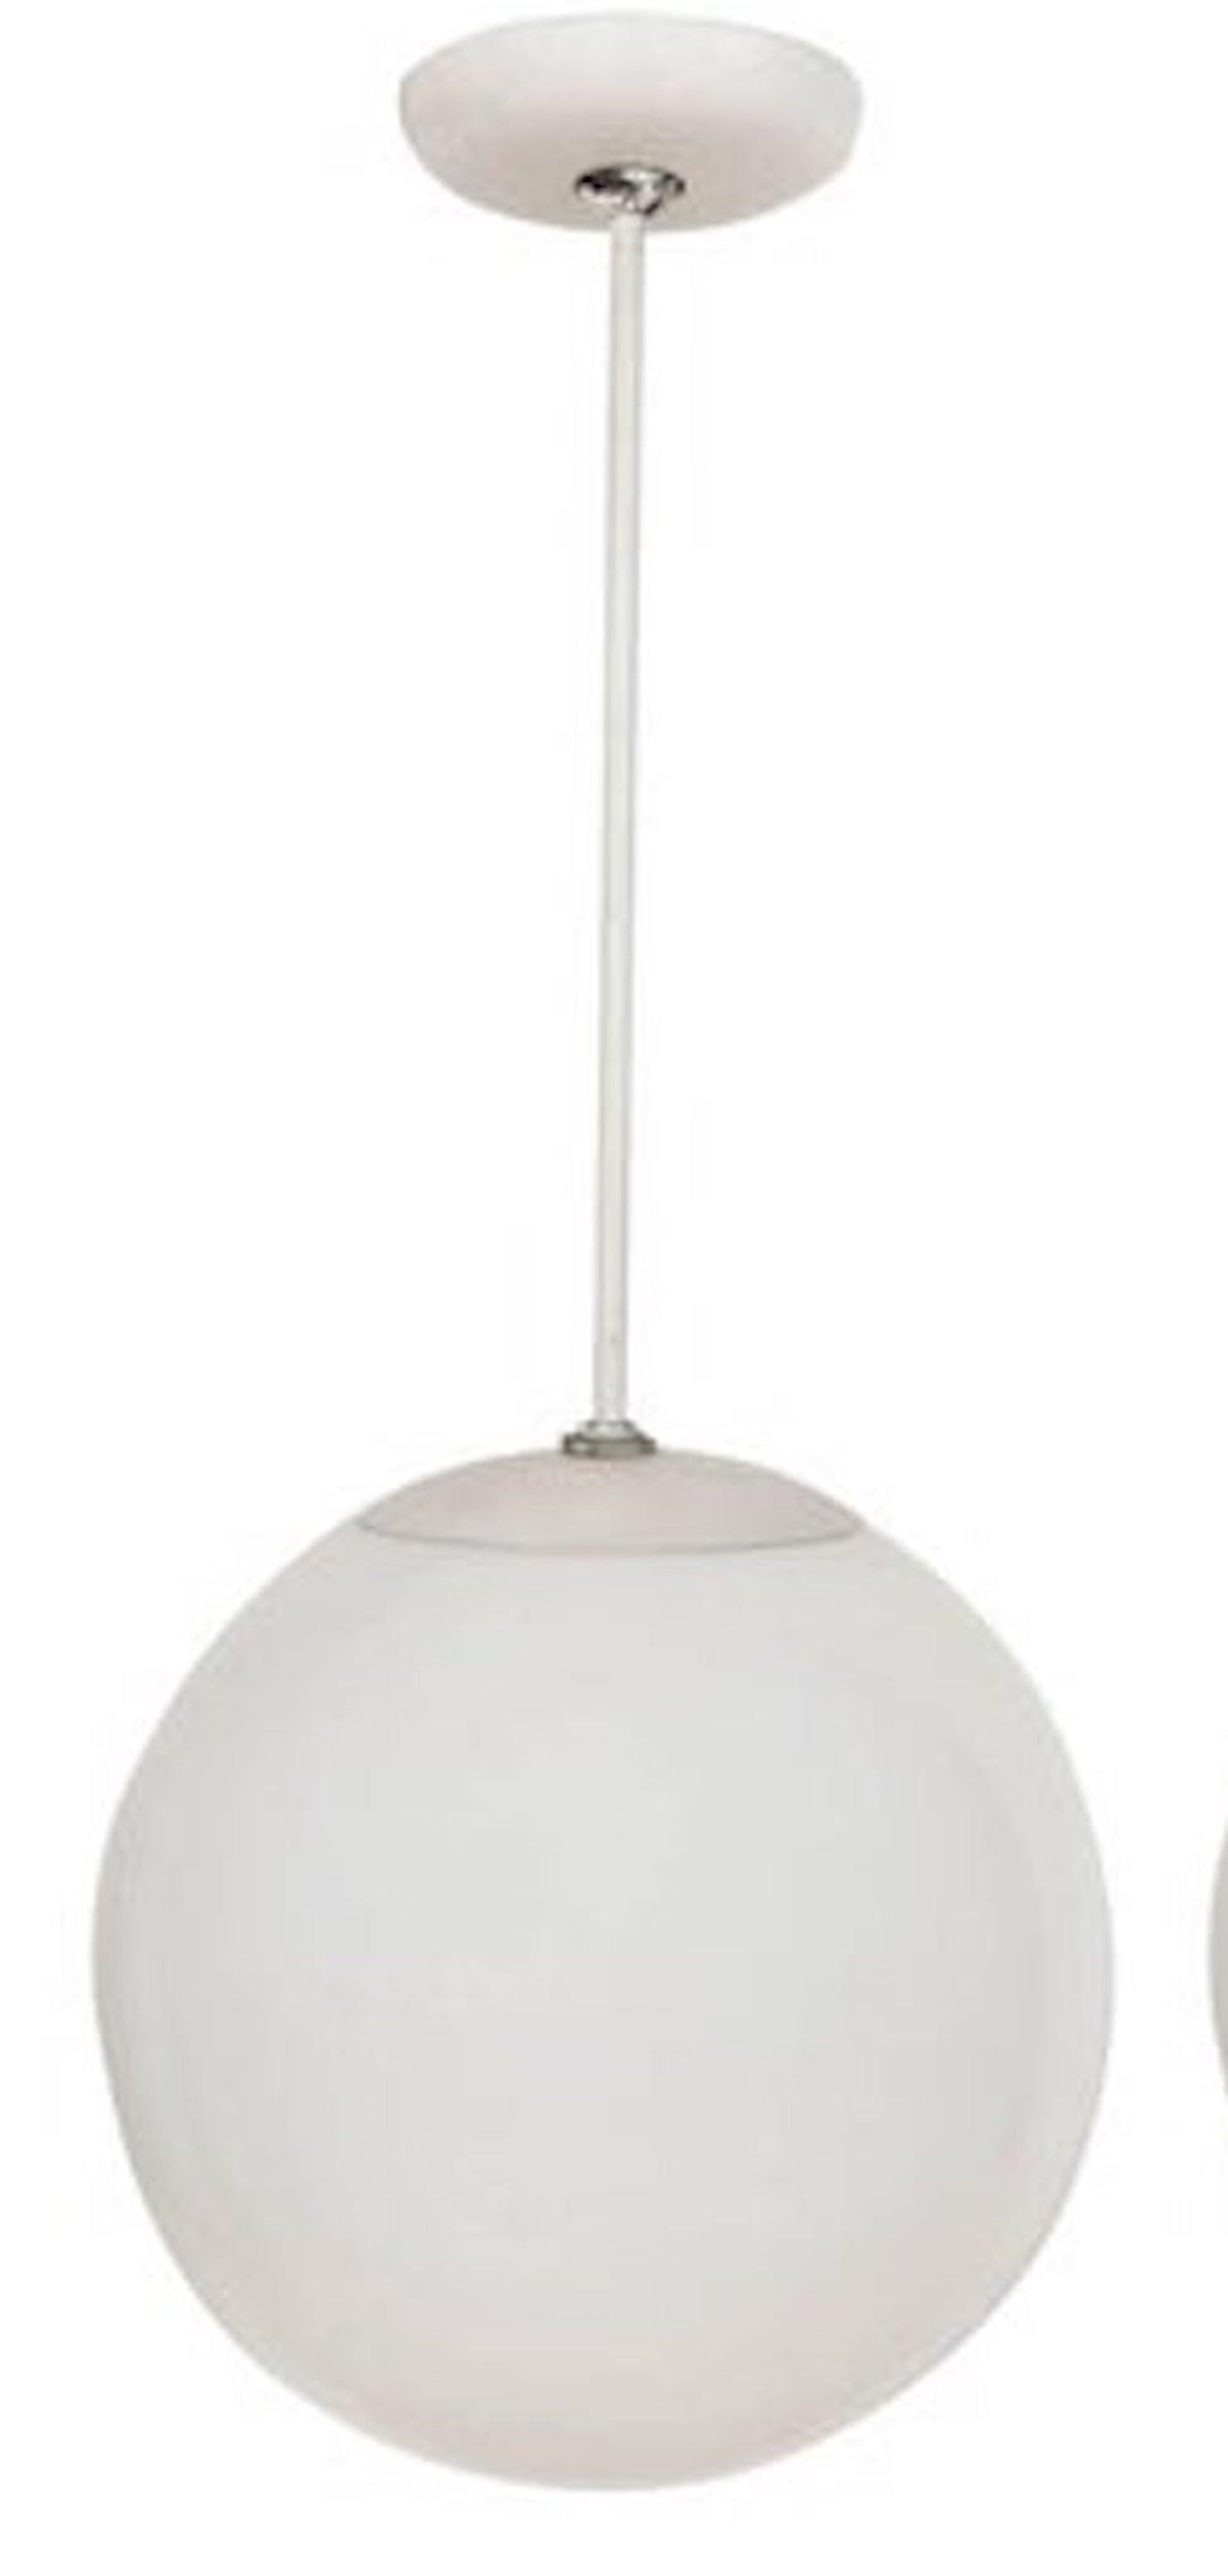 Mid-century light fixture with white glass globe hanging shade pendant. 
 large opaline globe pendants, 1960s
Originally designed and made by Prescolite in the style of Kurt Versen.
These lamps were a signature light fixture in early Eichler